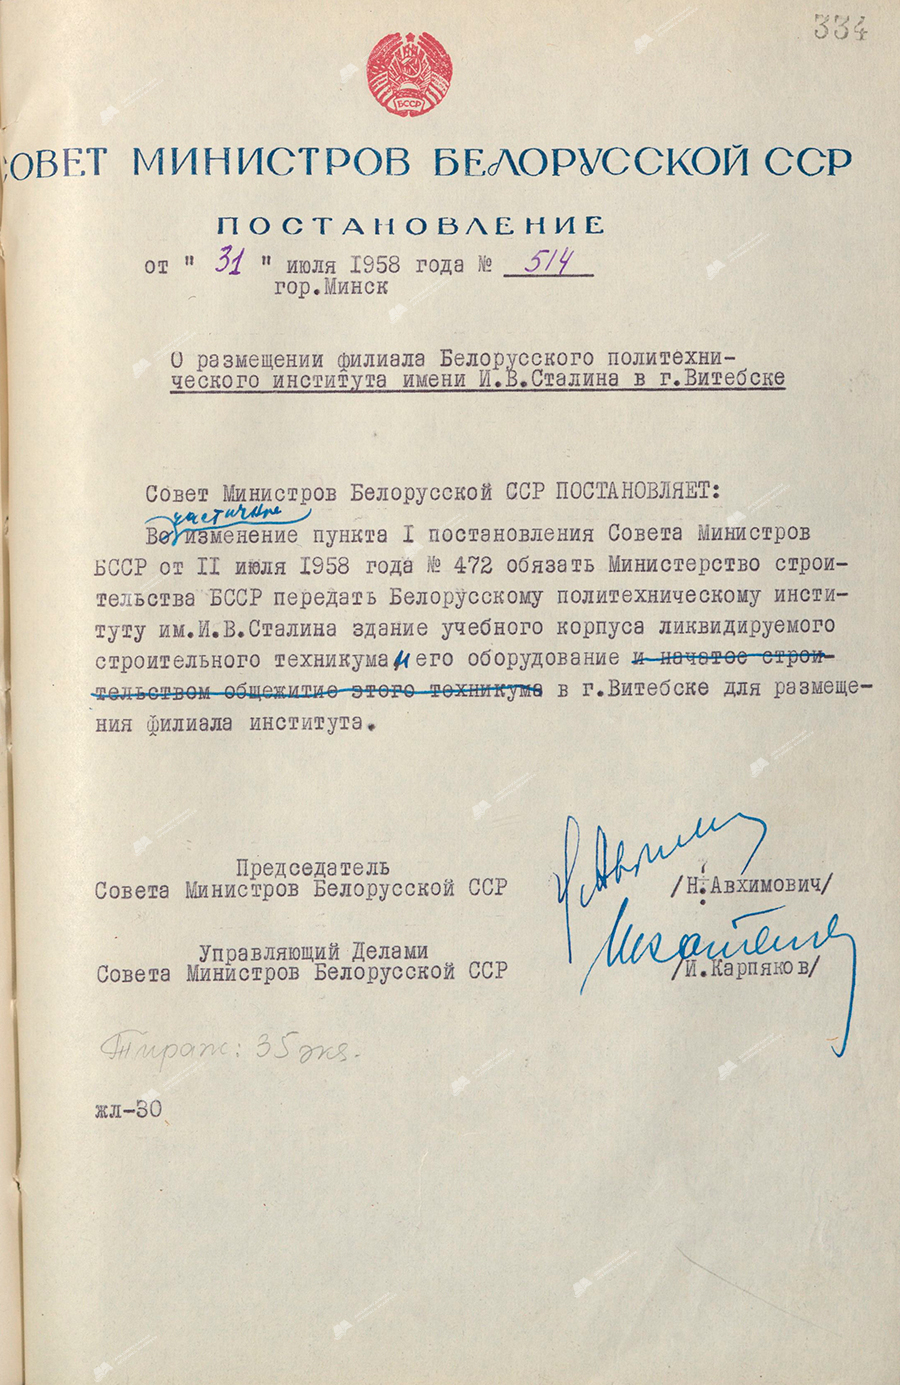 Resolution No. 514 of the Council of Ministers of the BSSR «On the location of a branch of the Belarusian Polytechnic Institute named after I.V. Stalin in Vitebsk»-с. 0